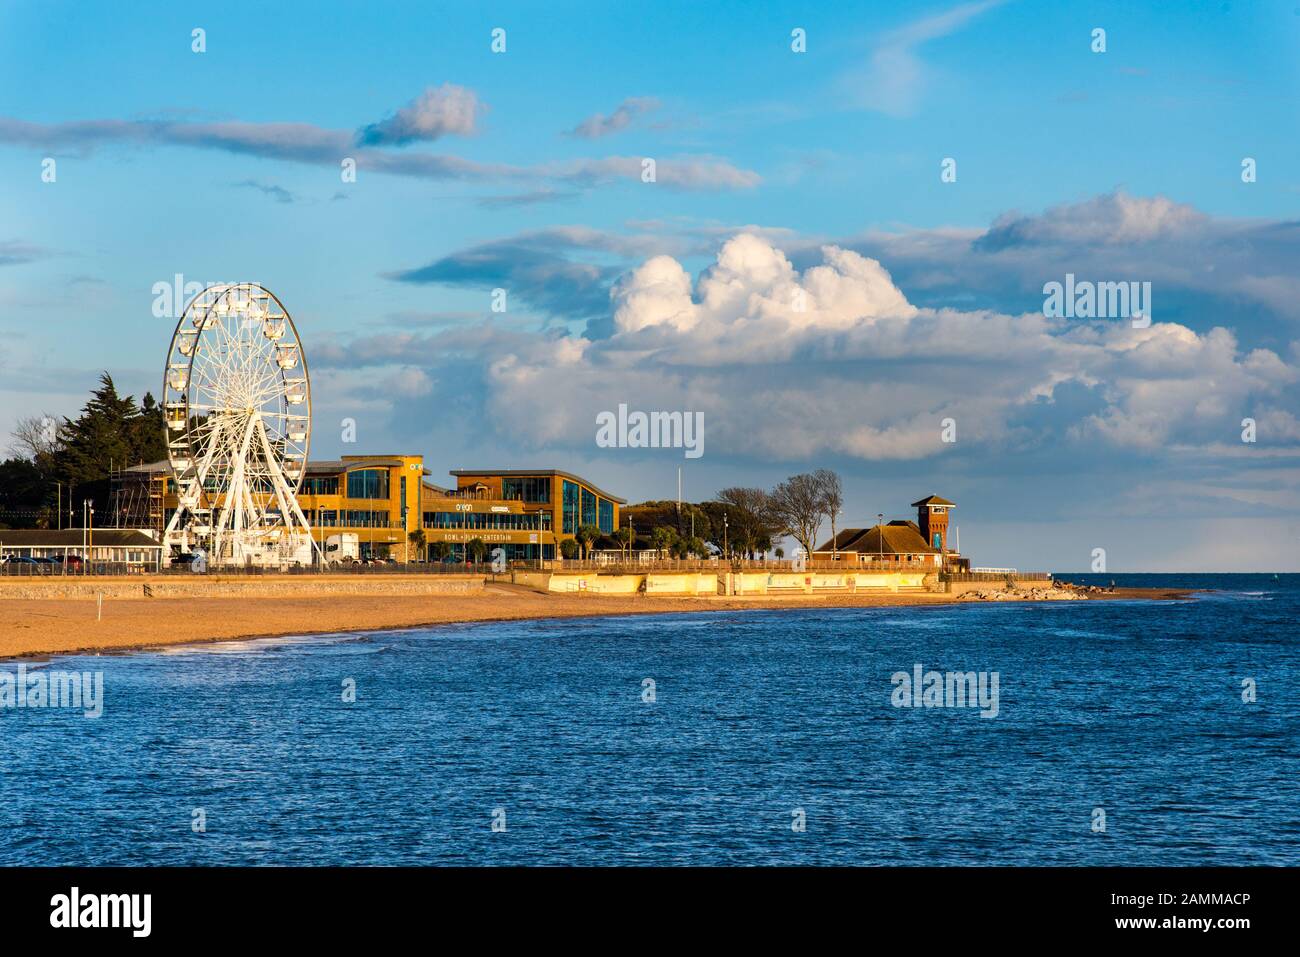 EXMOUTH, DEVON, UK - 3APR2019:  The Big Wheel is a 28 metre ferris wheel on the seafront at Exmouth. Stock Photo